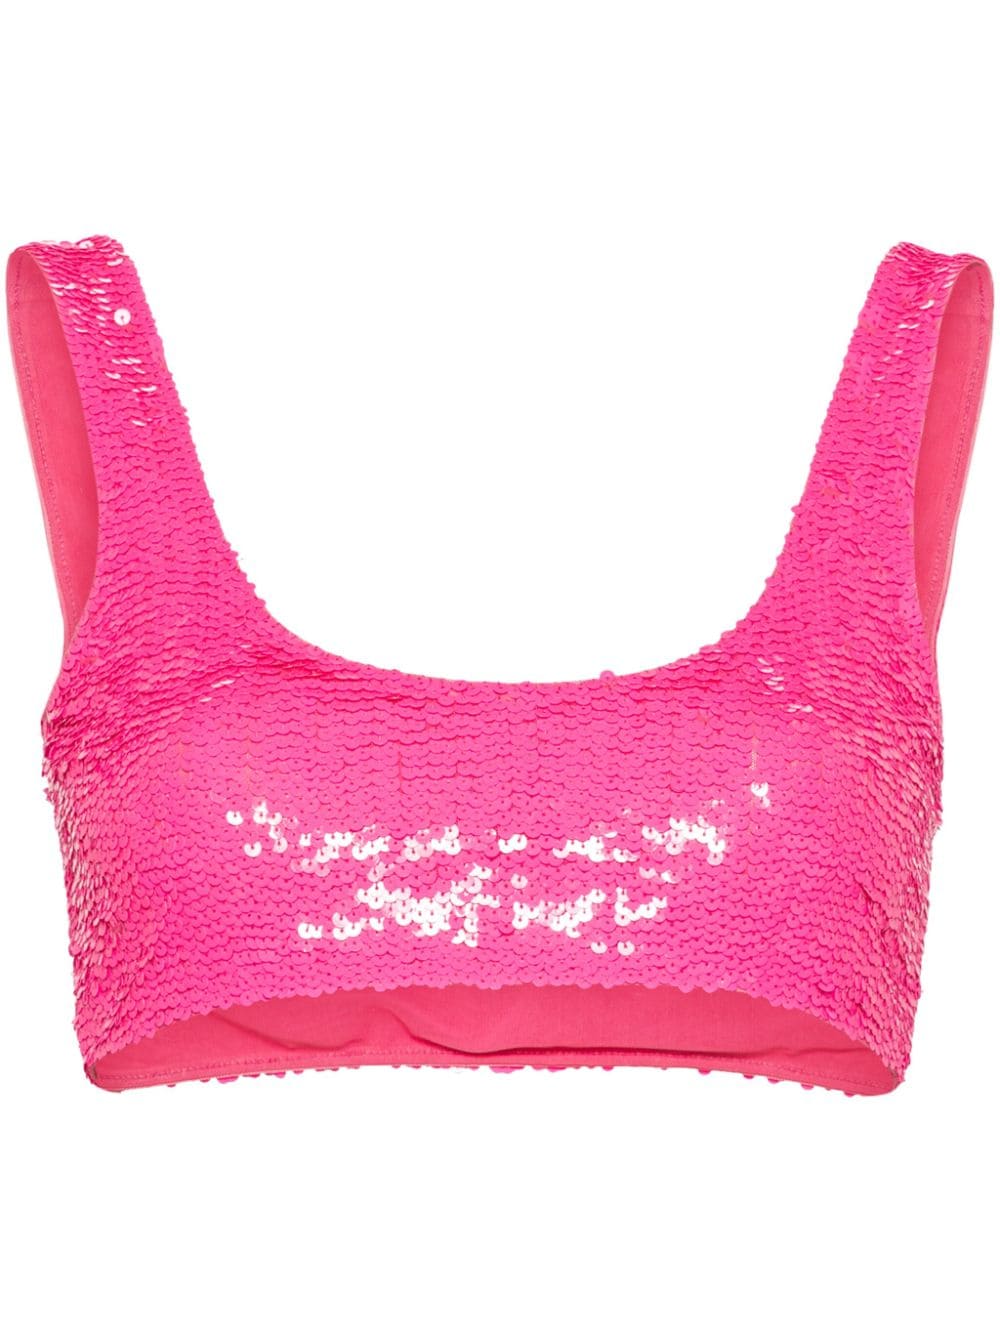 P.A.R.O.S.H. sequin-embellished cropped top - Pink von P.A.R.O.S.H.